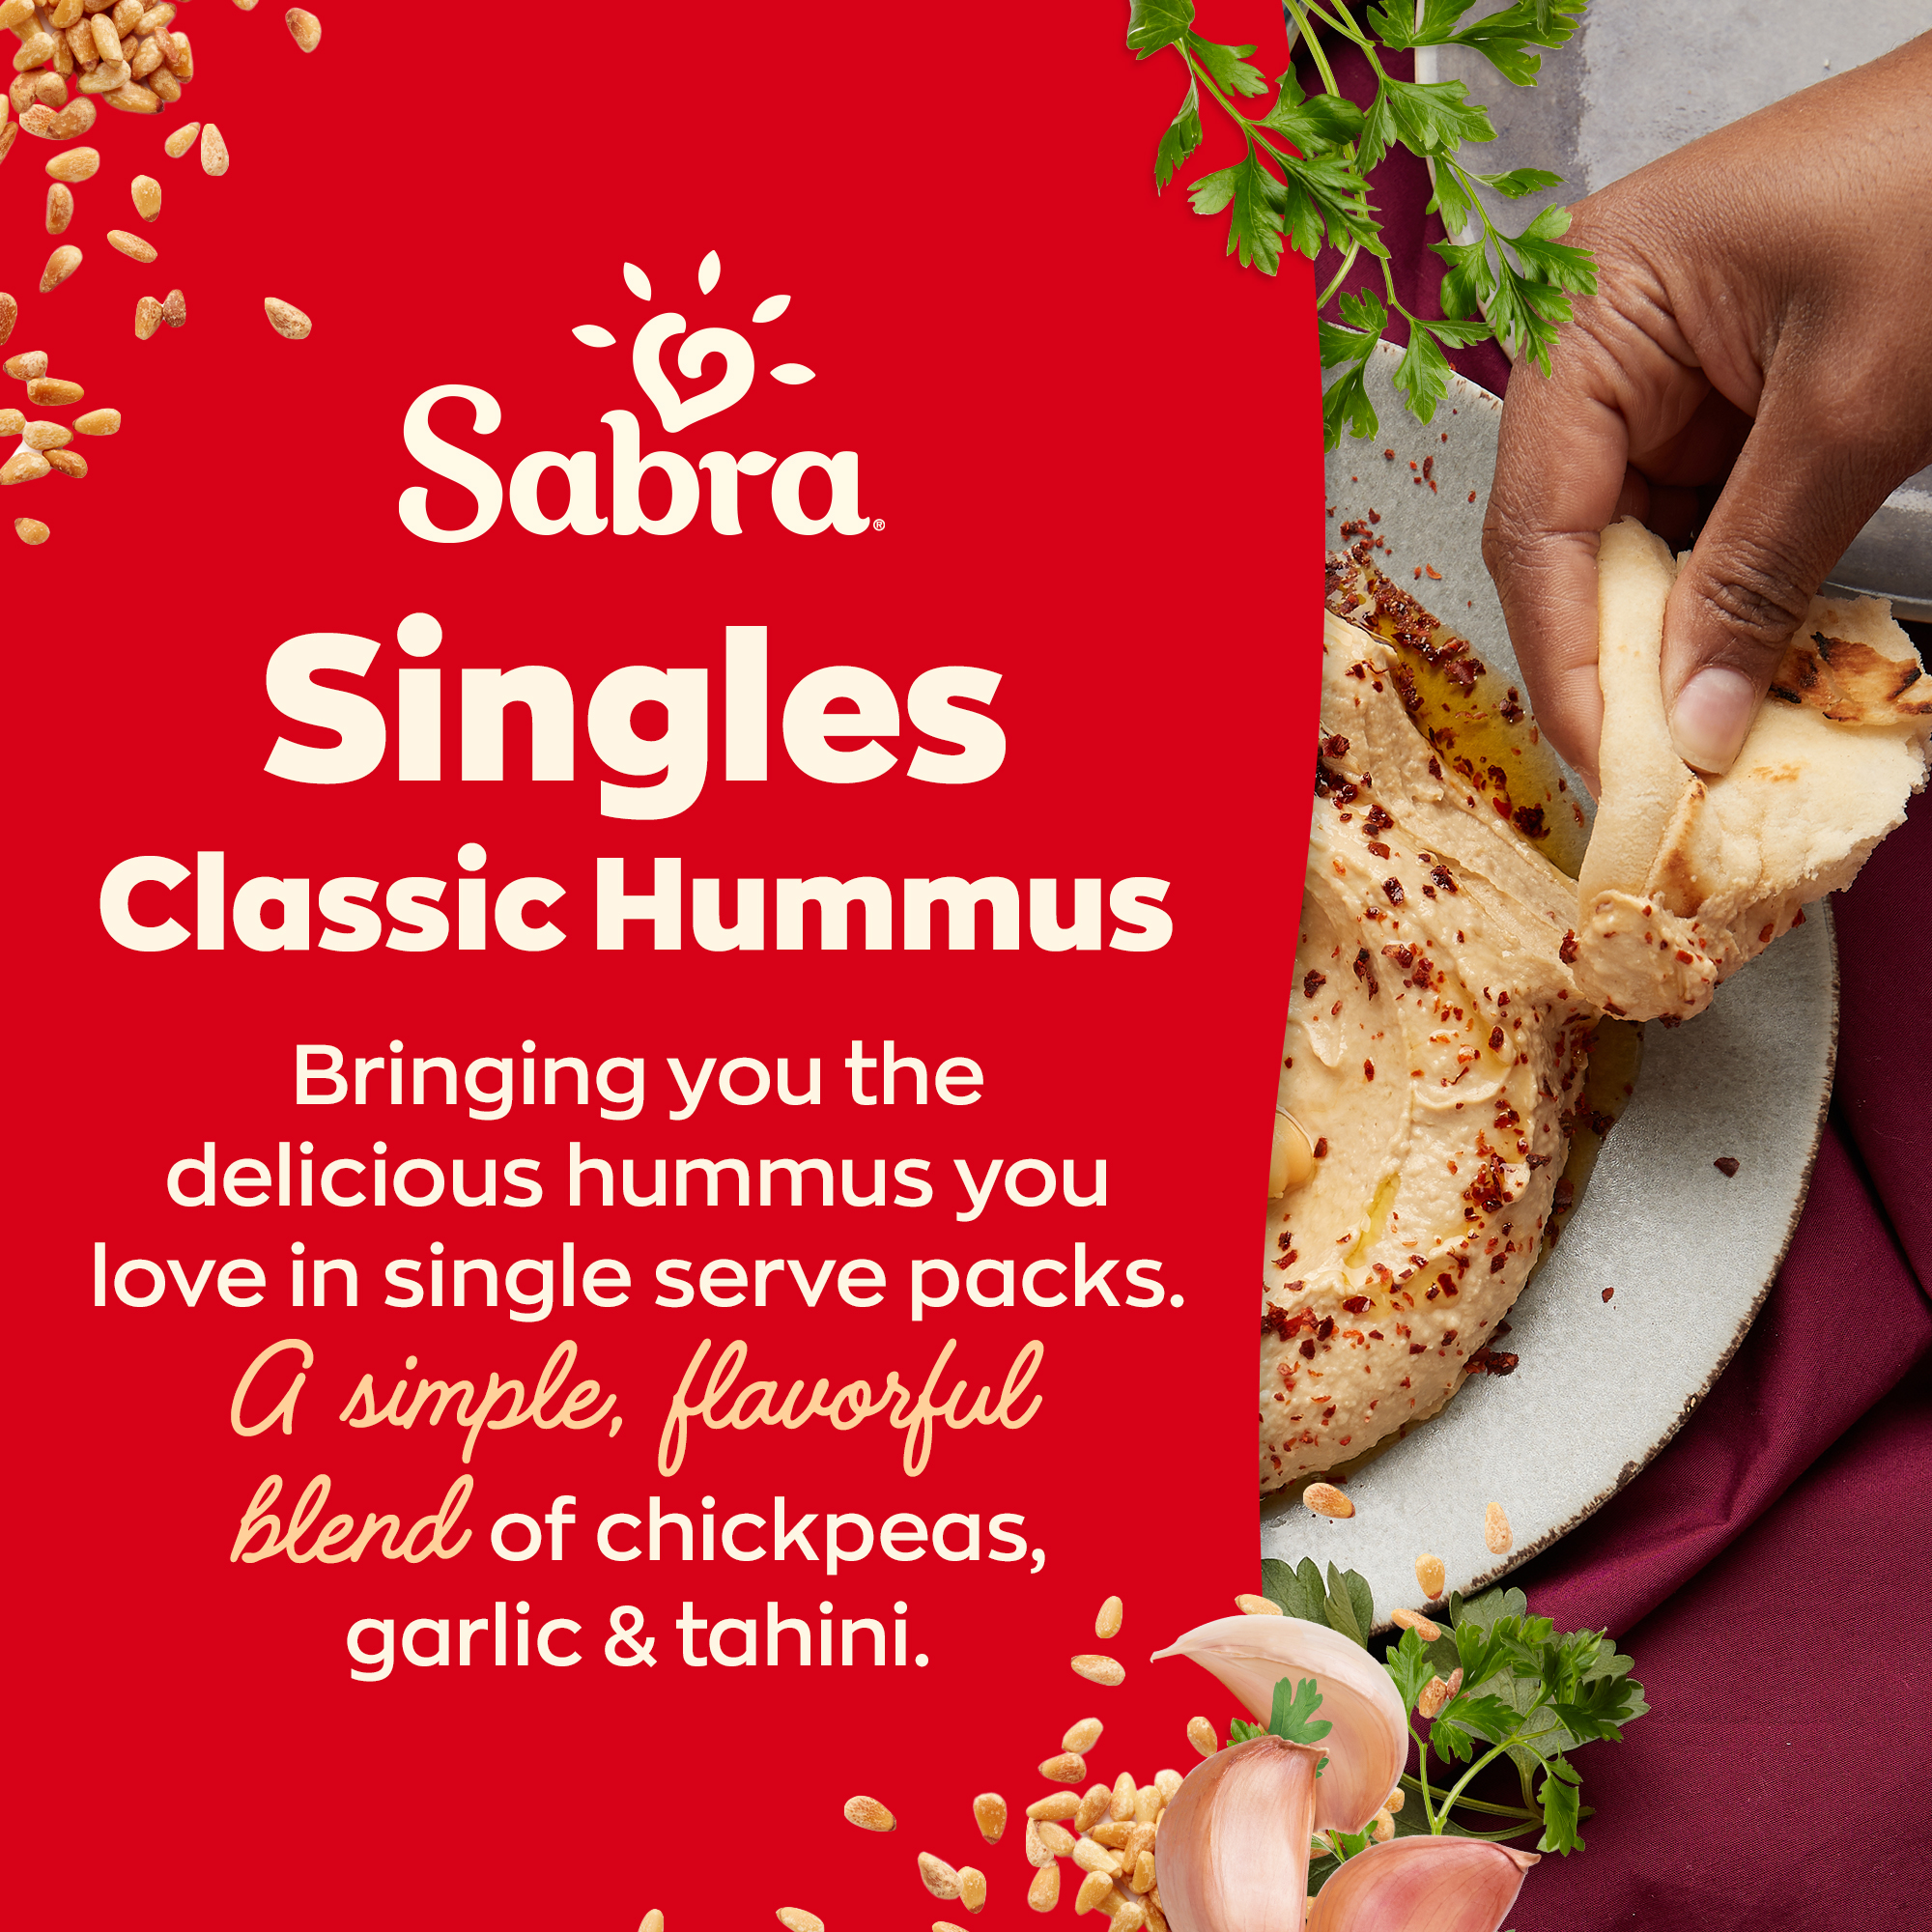 Sabra Classic Hummus Singles, 2 oz Plastic Cups (6 Pack), Gluten-Free, Serving Size 1 minicup (57g) - image 3 of 8